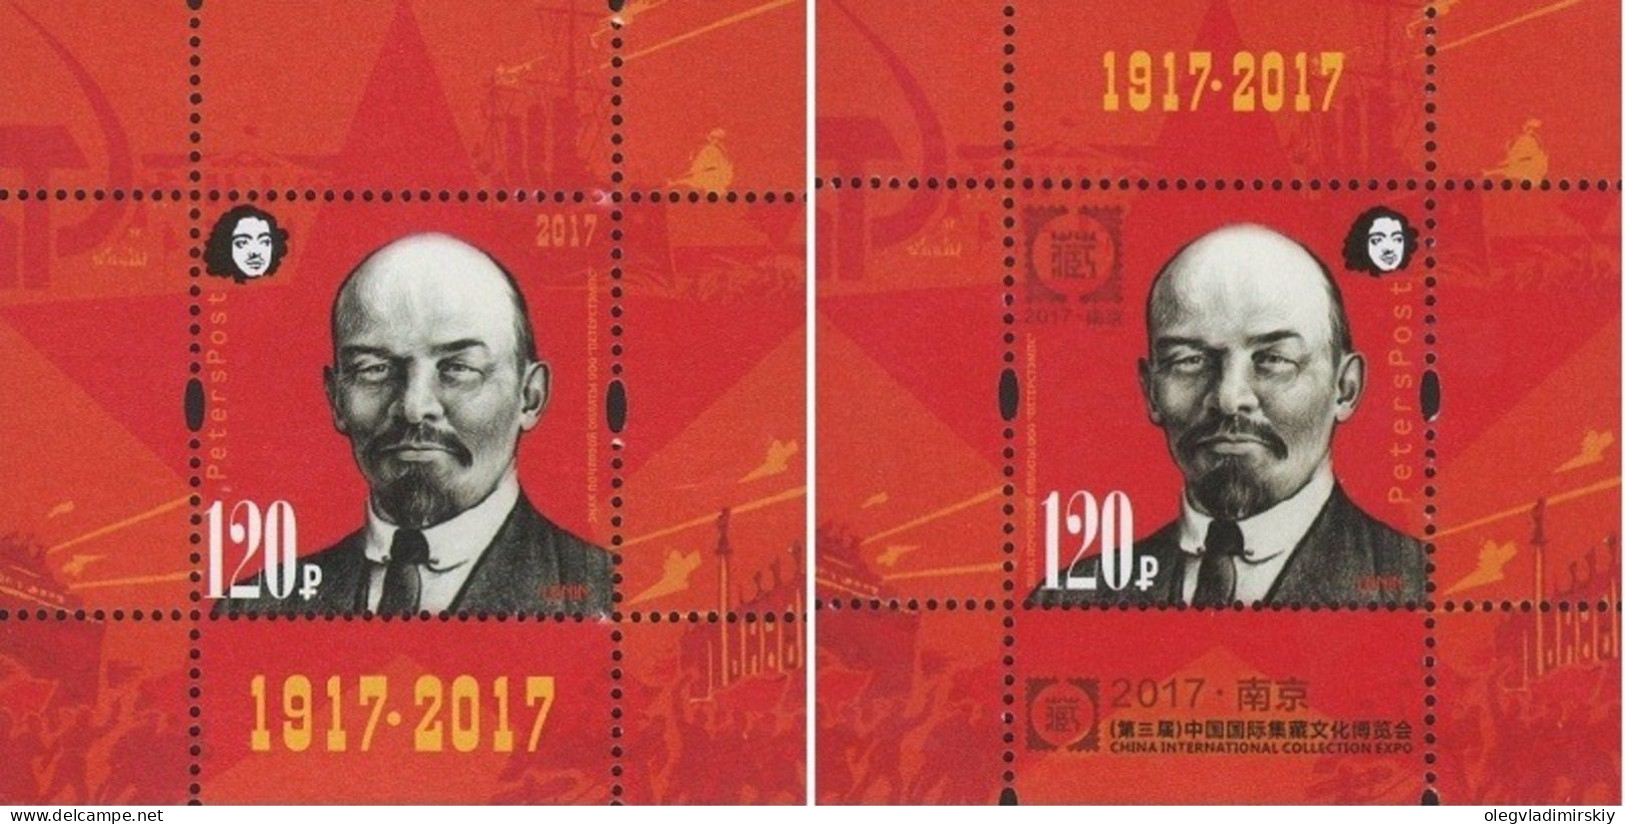 Russia 2017 100 Ann Of Great Russian Revolution 1917-2017 Lenin Exhibition China EXPO-2017 Peterspost Set Of 2 Block's - Guerre Mondiale (Première)